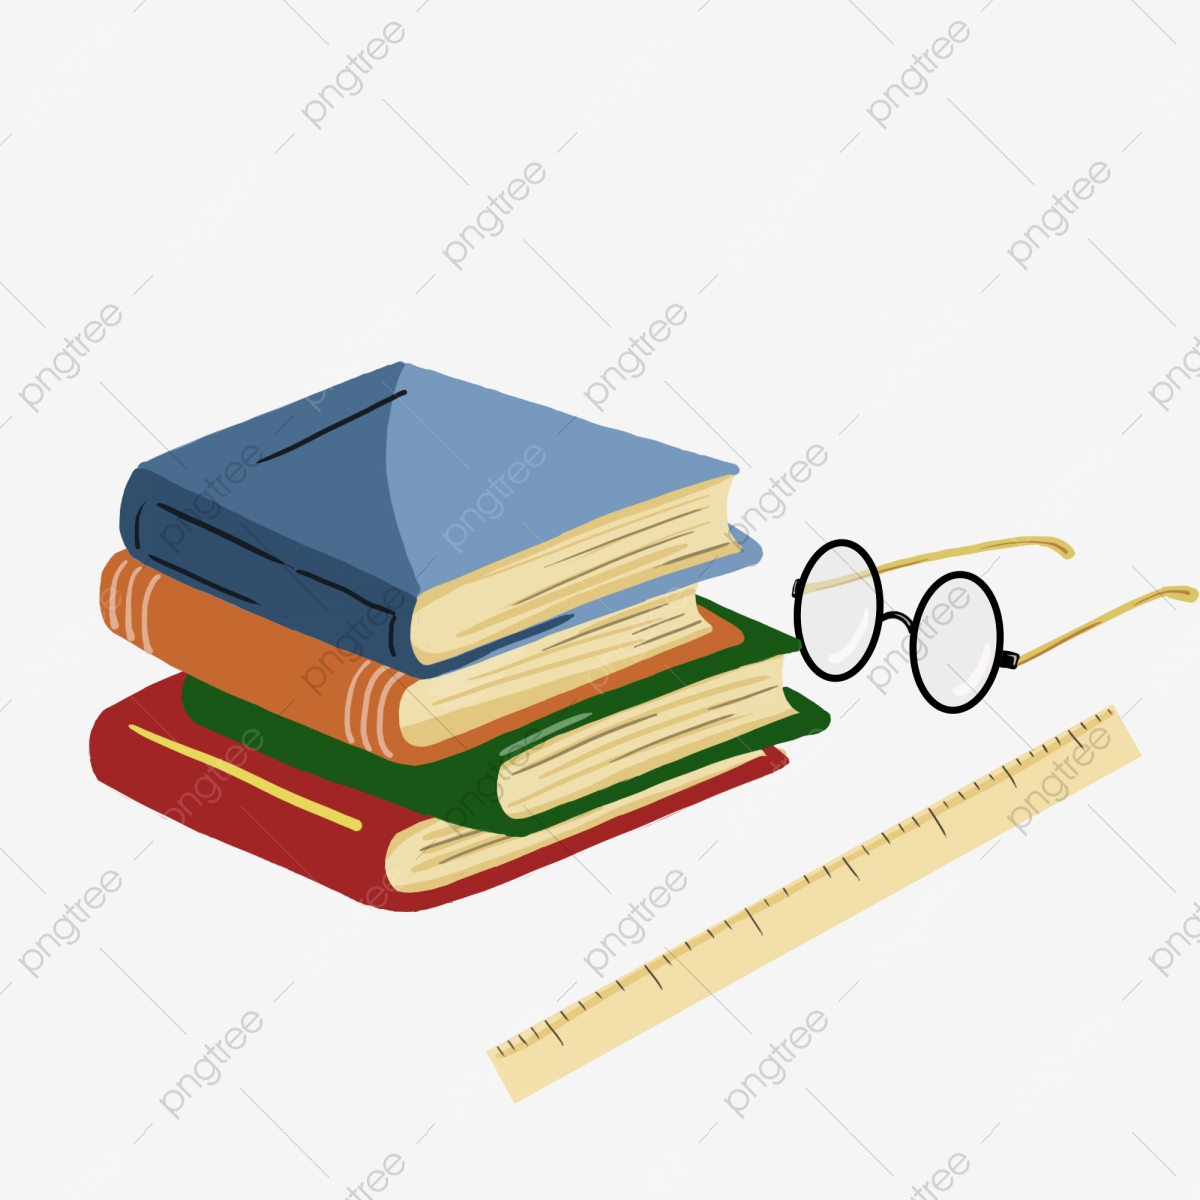 Book stationery minimalistic hand. Ruler clipart stationary